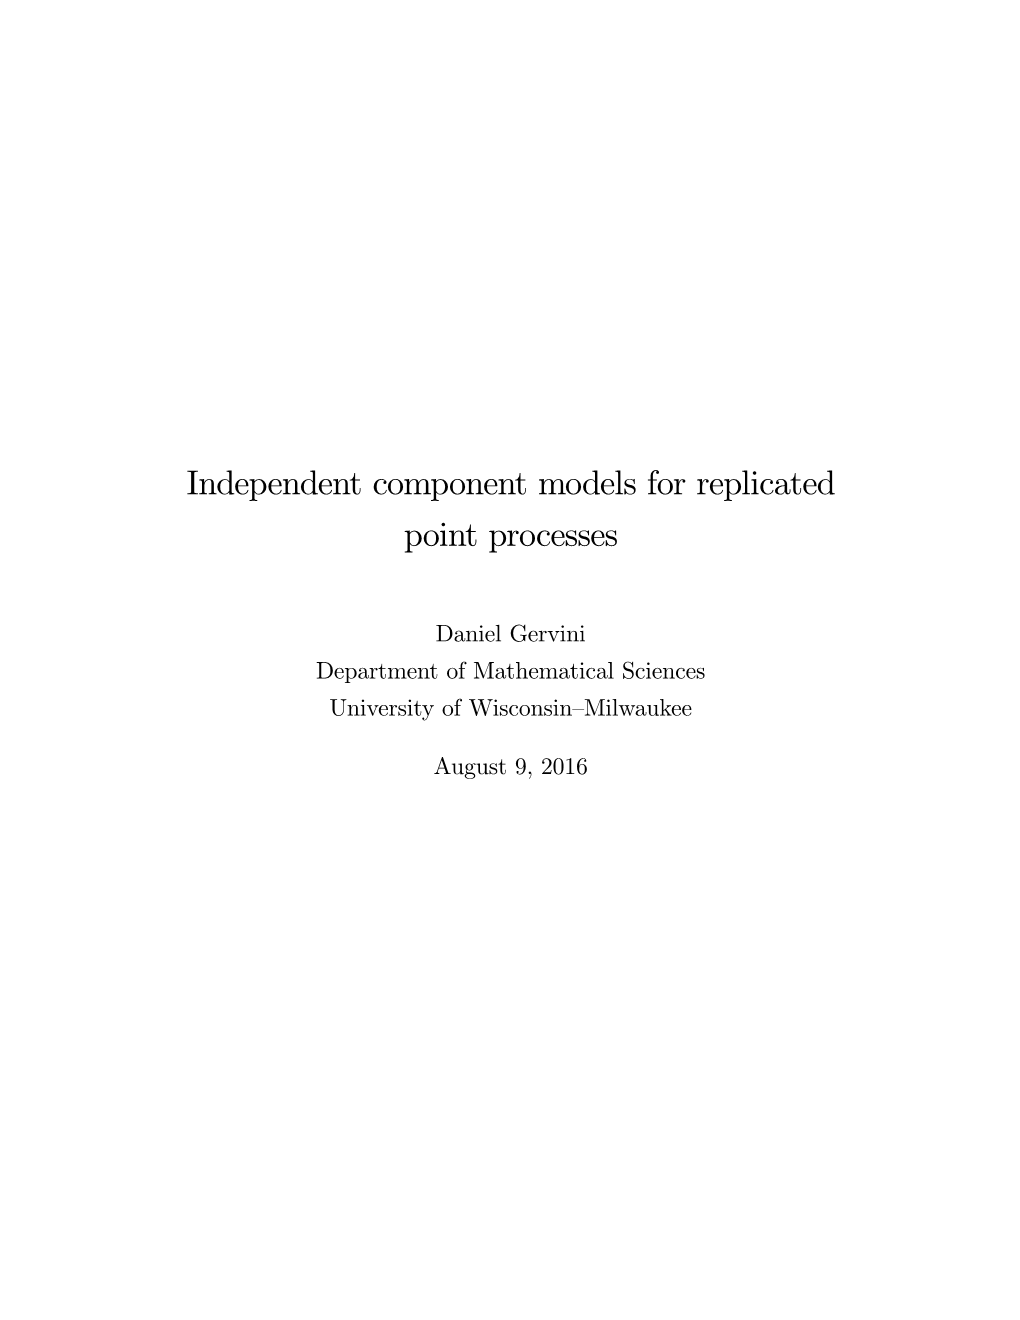 Independent Component Models for Replicated Point Processes